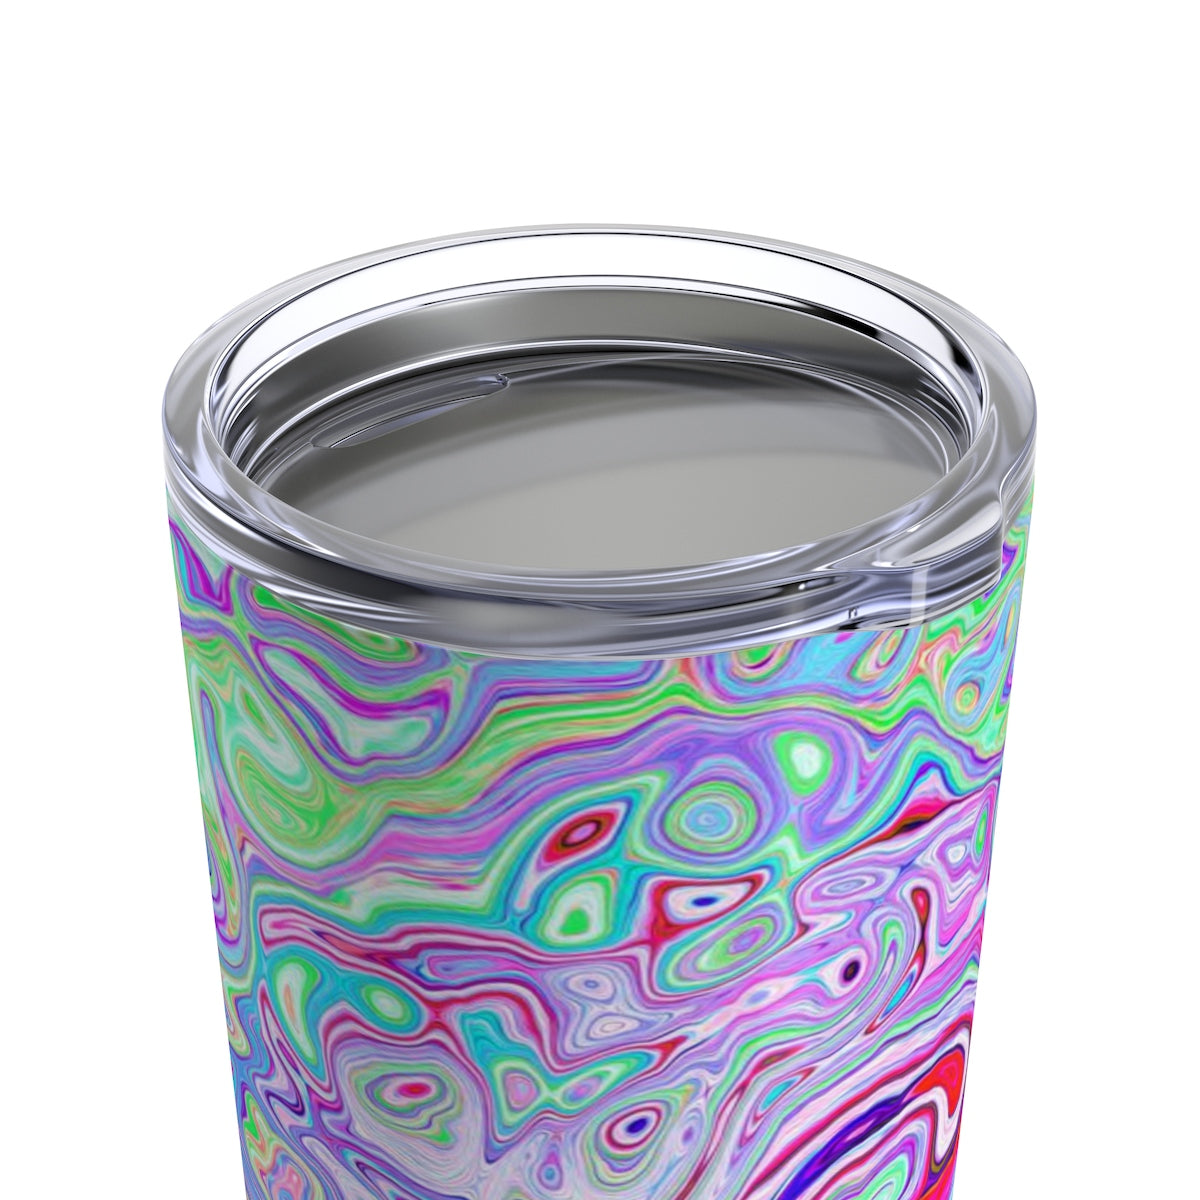 Tumbler 20oz, Groovy Abstract Retro Pink and Green Swirl